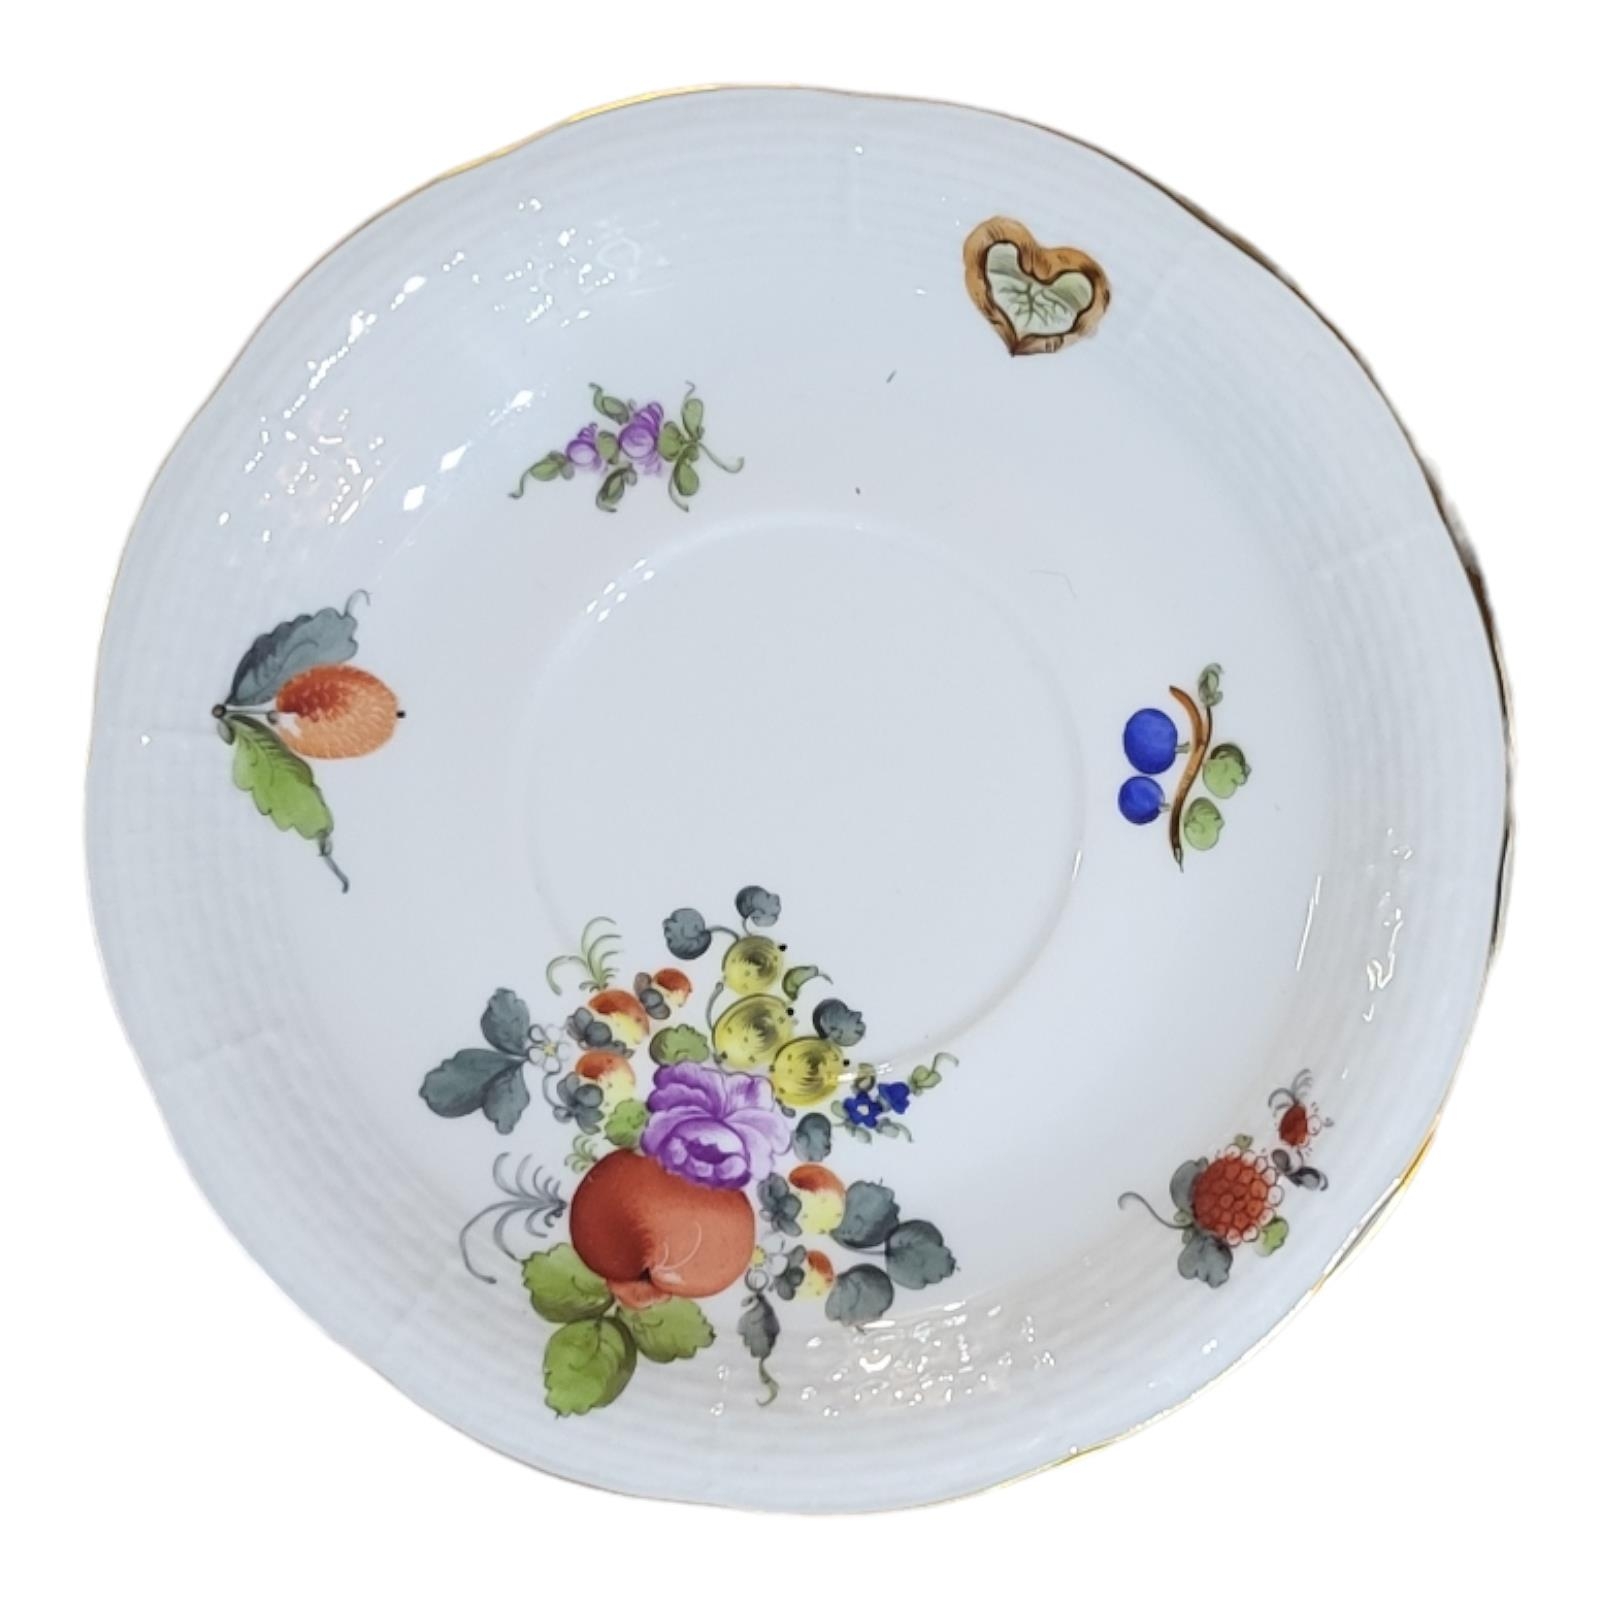 HEREND, A 20TH CENTURY HARD PORCELAIN DINNER SERVICE, CIRCA 1930 Comprising thirty-six pieces in - Image 5 of 11